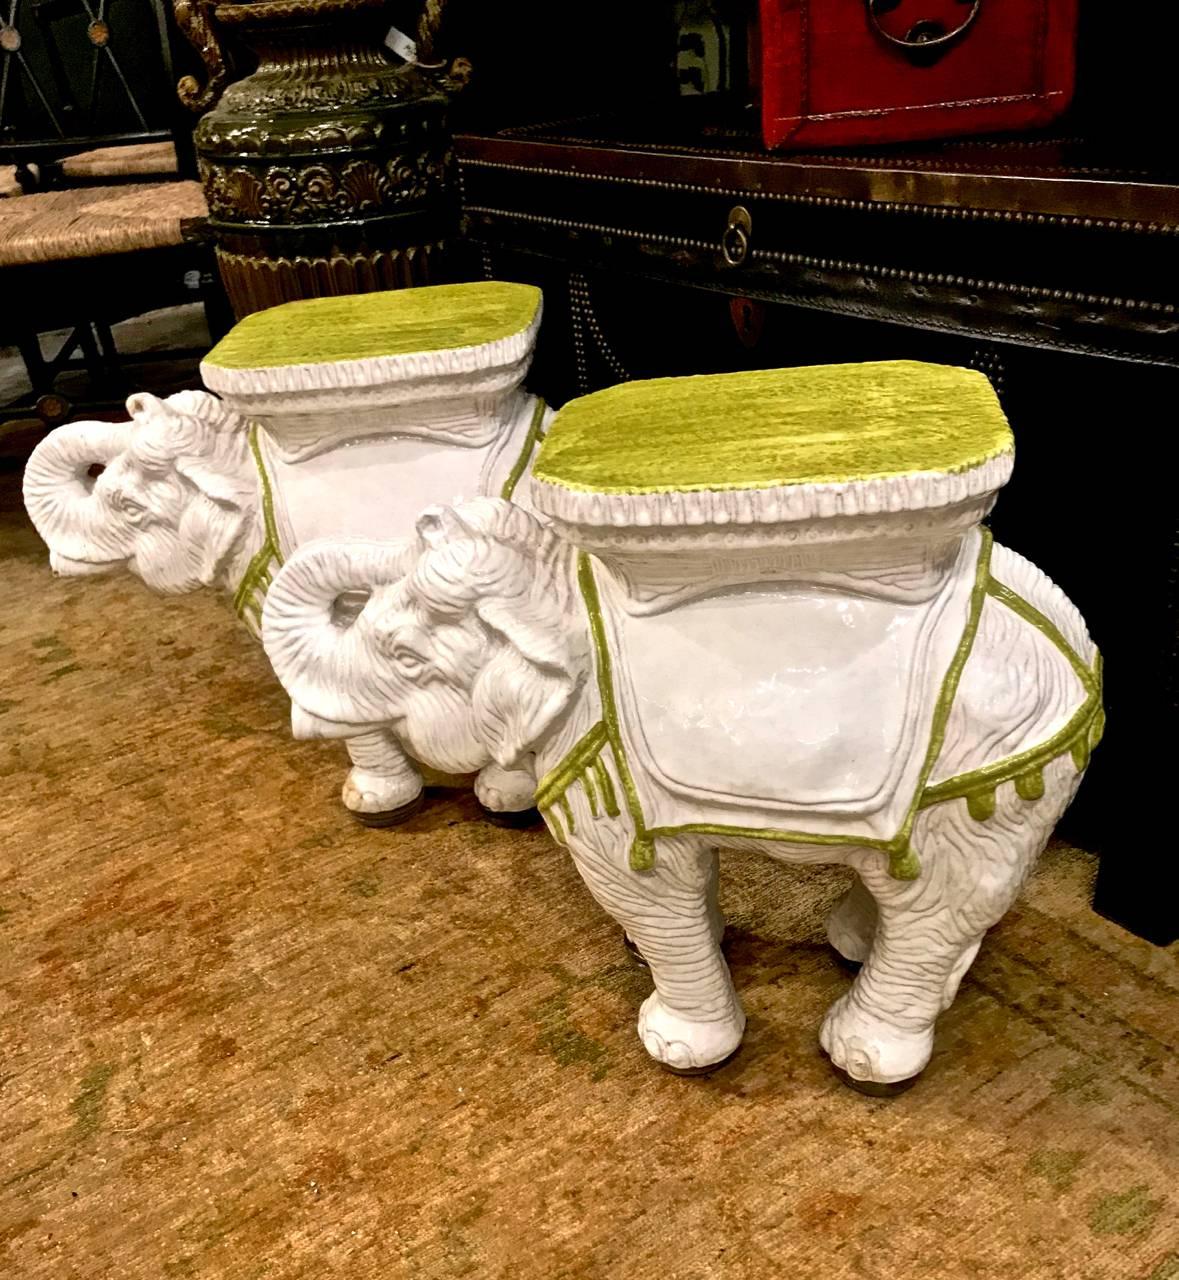 This is a great pair of c.1960s Italian ceramic garden stools or tables. These highly decorative white toned elephants are cast in fine detail and decorated with a lime green trimmed yellow seat. Both of the elephants are in overall excellent